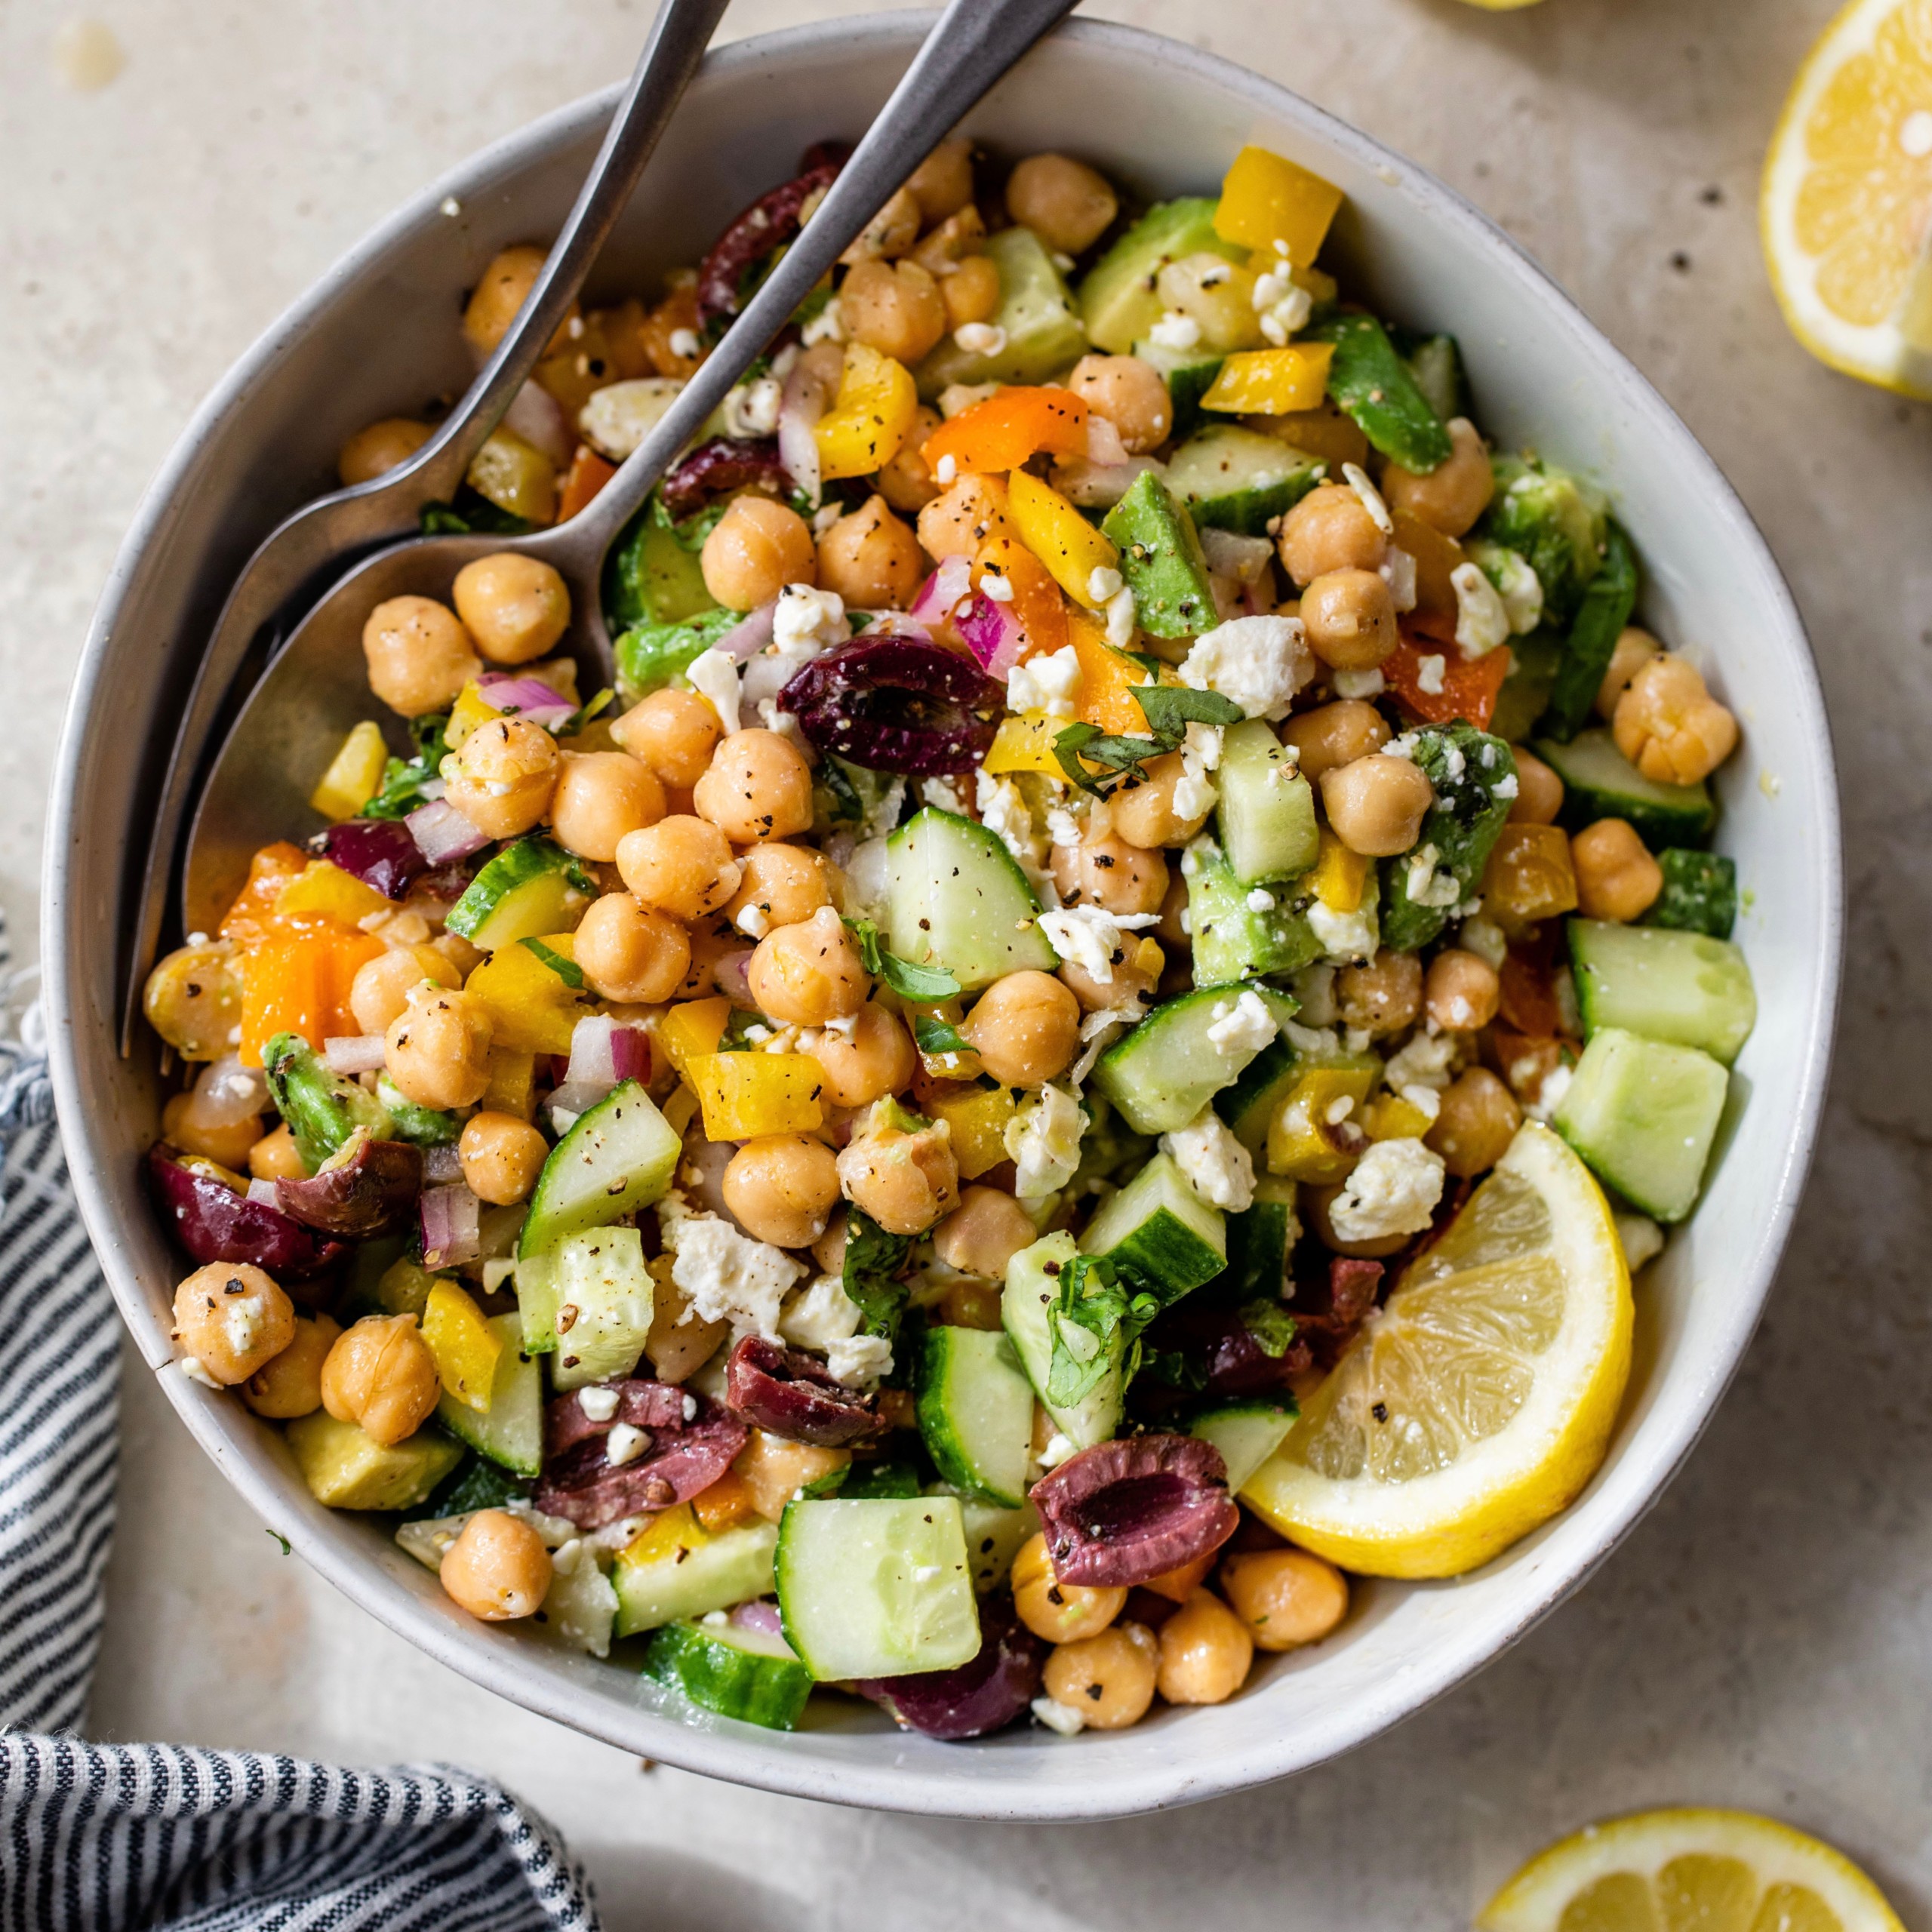 Winter Salad Recipes: Easy, Healthy Salads To Enjoy In The Cold